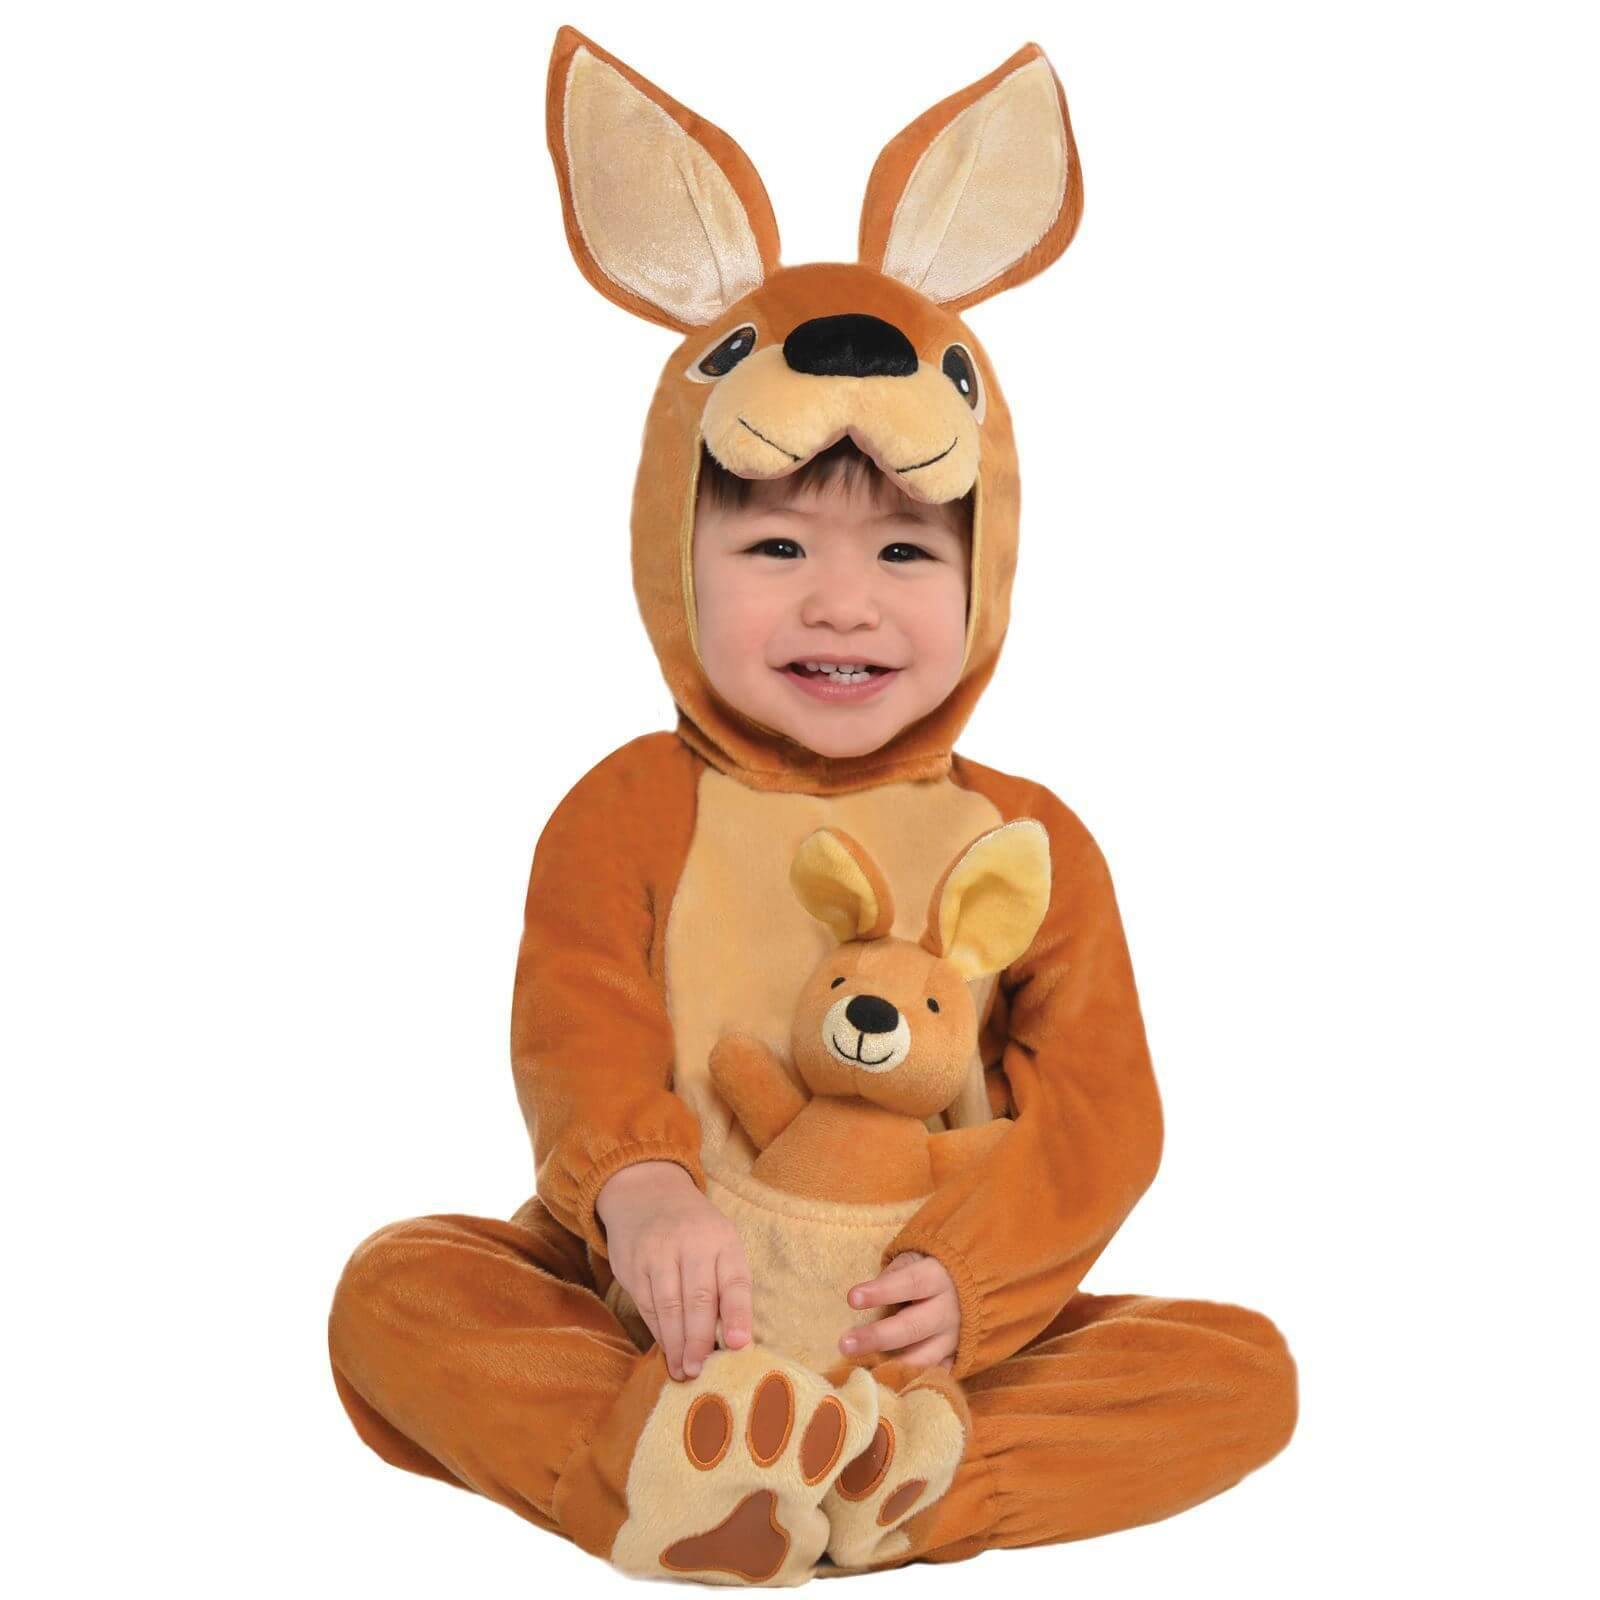 Infant Jumpin' Joey Costume Costumes & Apparel - Party Centre - Party Centre